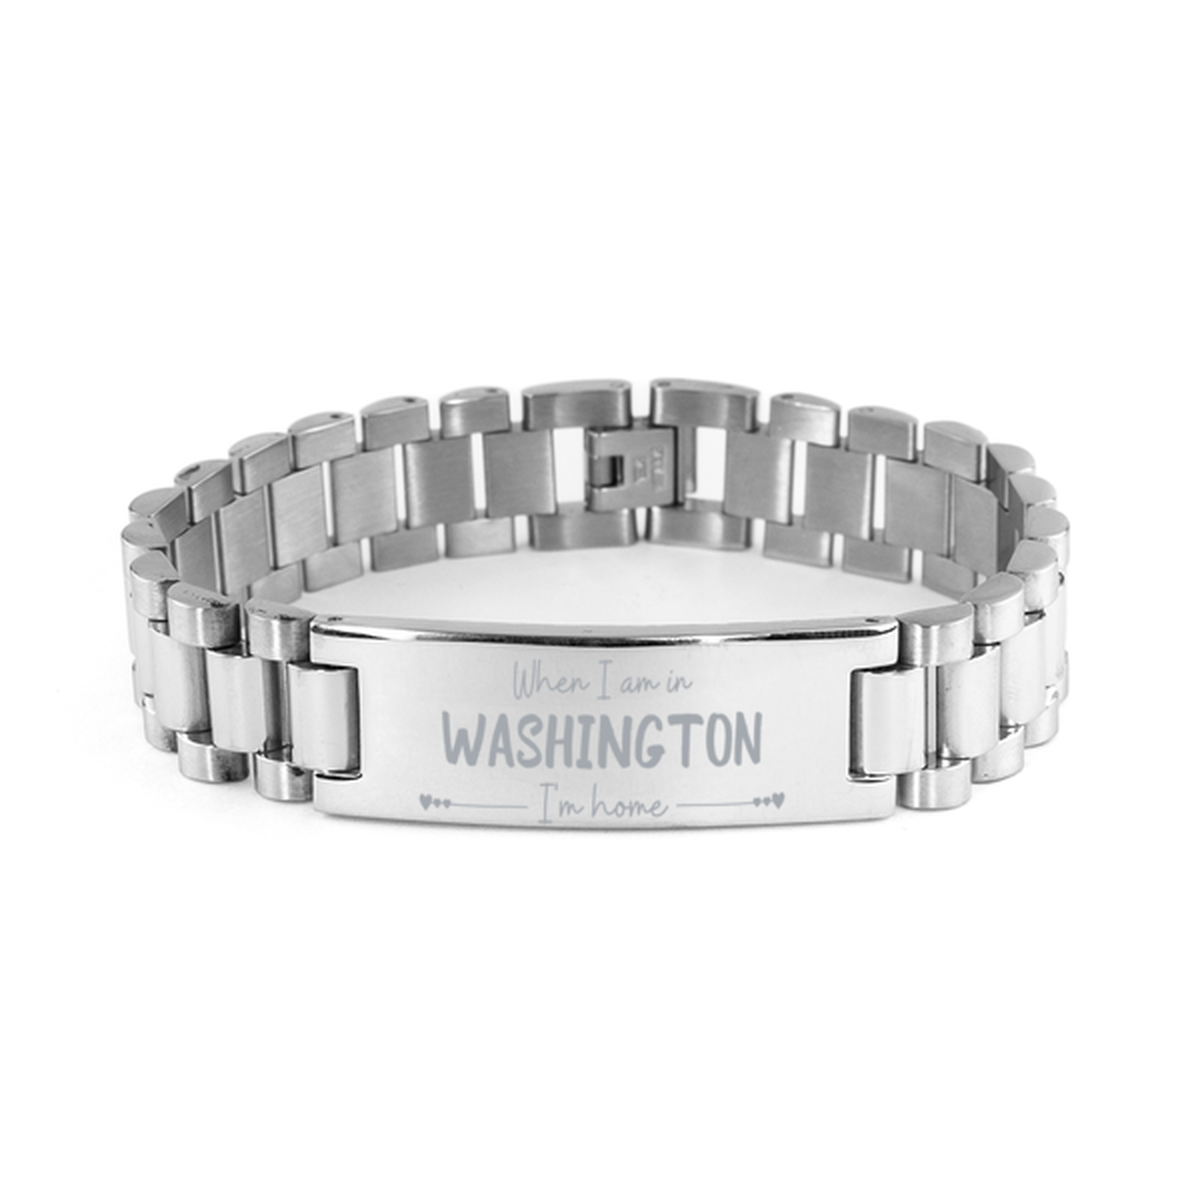 When I am in Washington I'm home Ladder Stainless Steel Bracelet, Cheap Gifts For Washington, State Washington Birthday Gifts for Friends Coworker